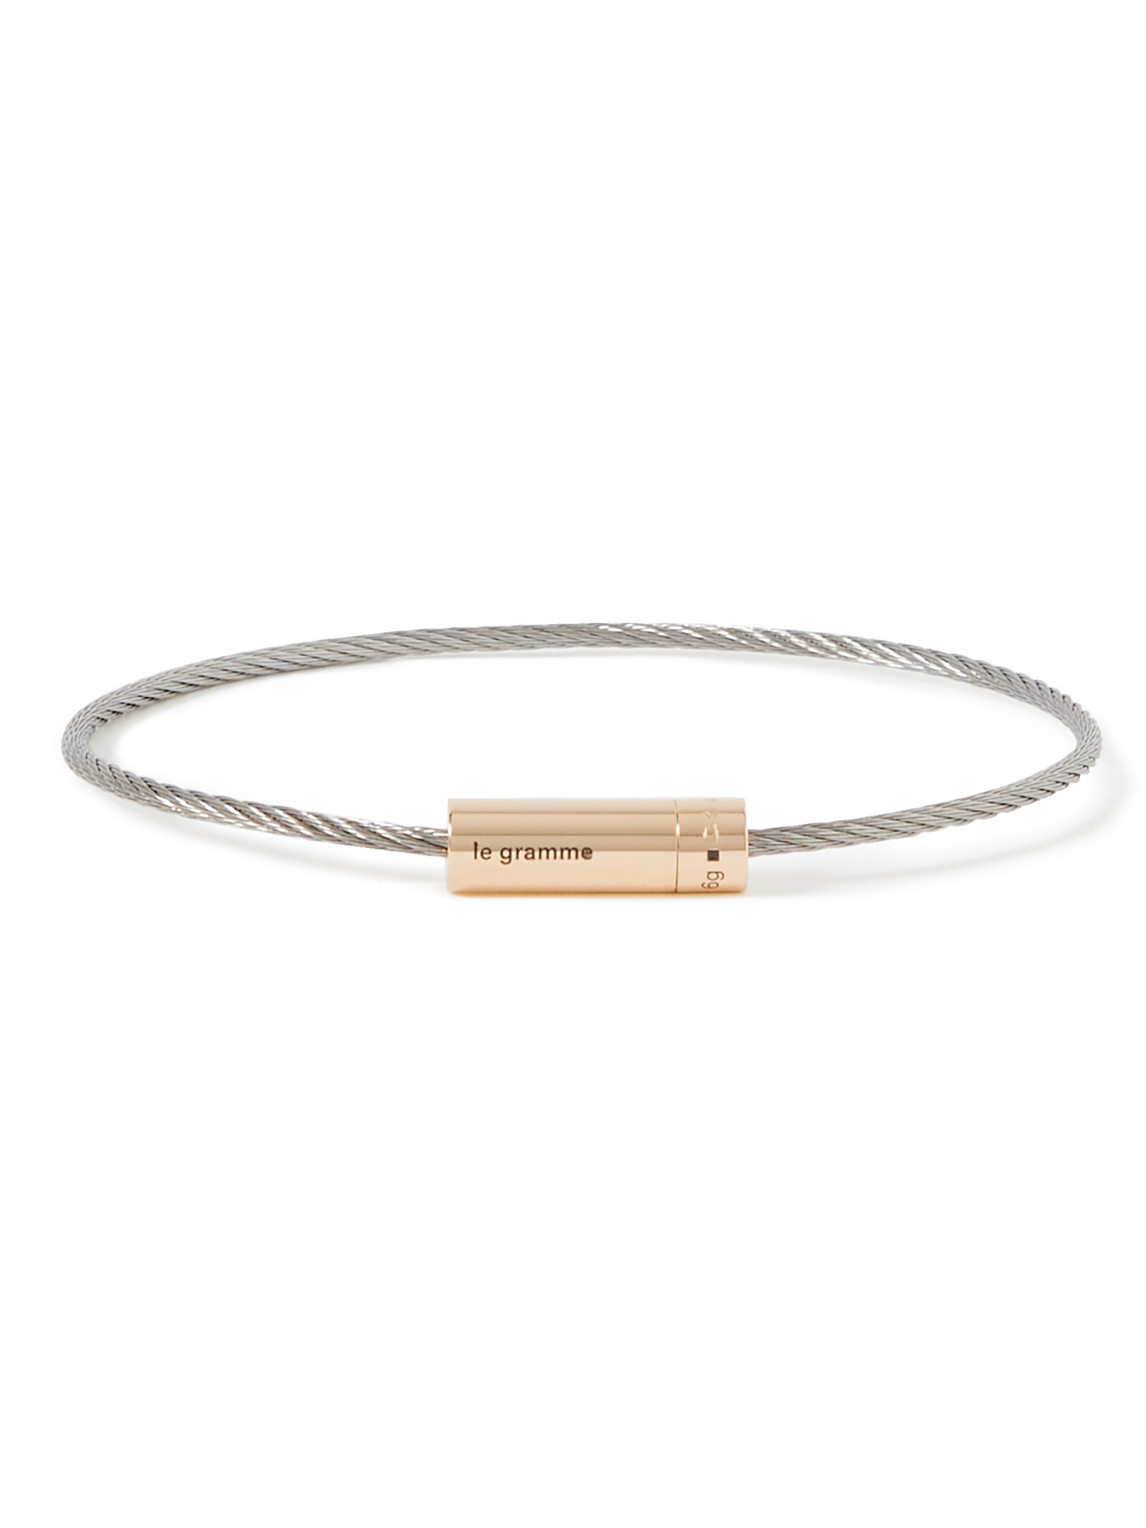 Le Gramme 6g 18-karat Recycled Gold, Titanium And Blackened Sterling Silver Bracelet